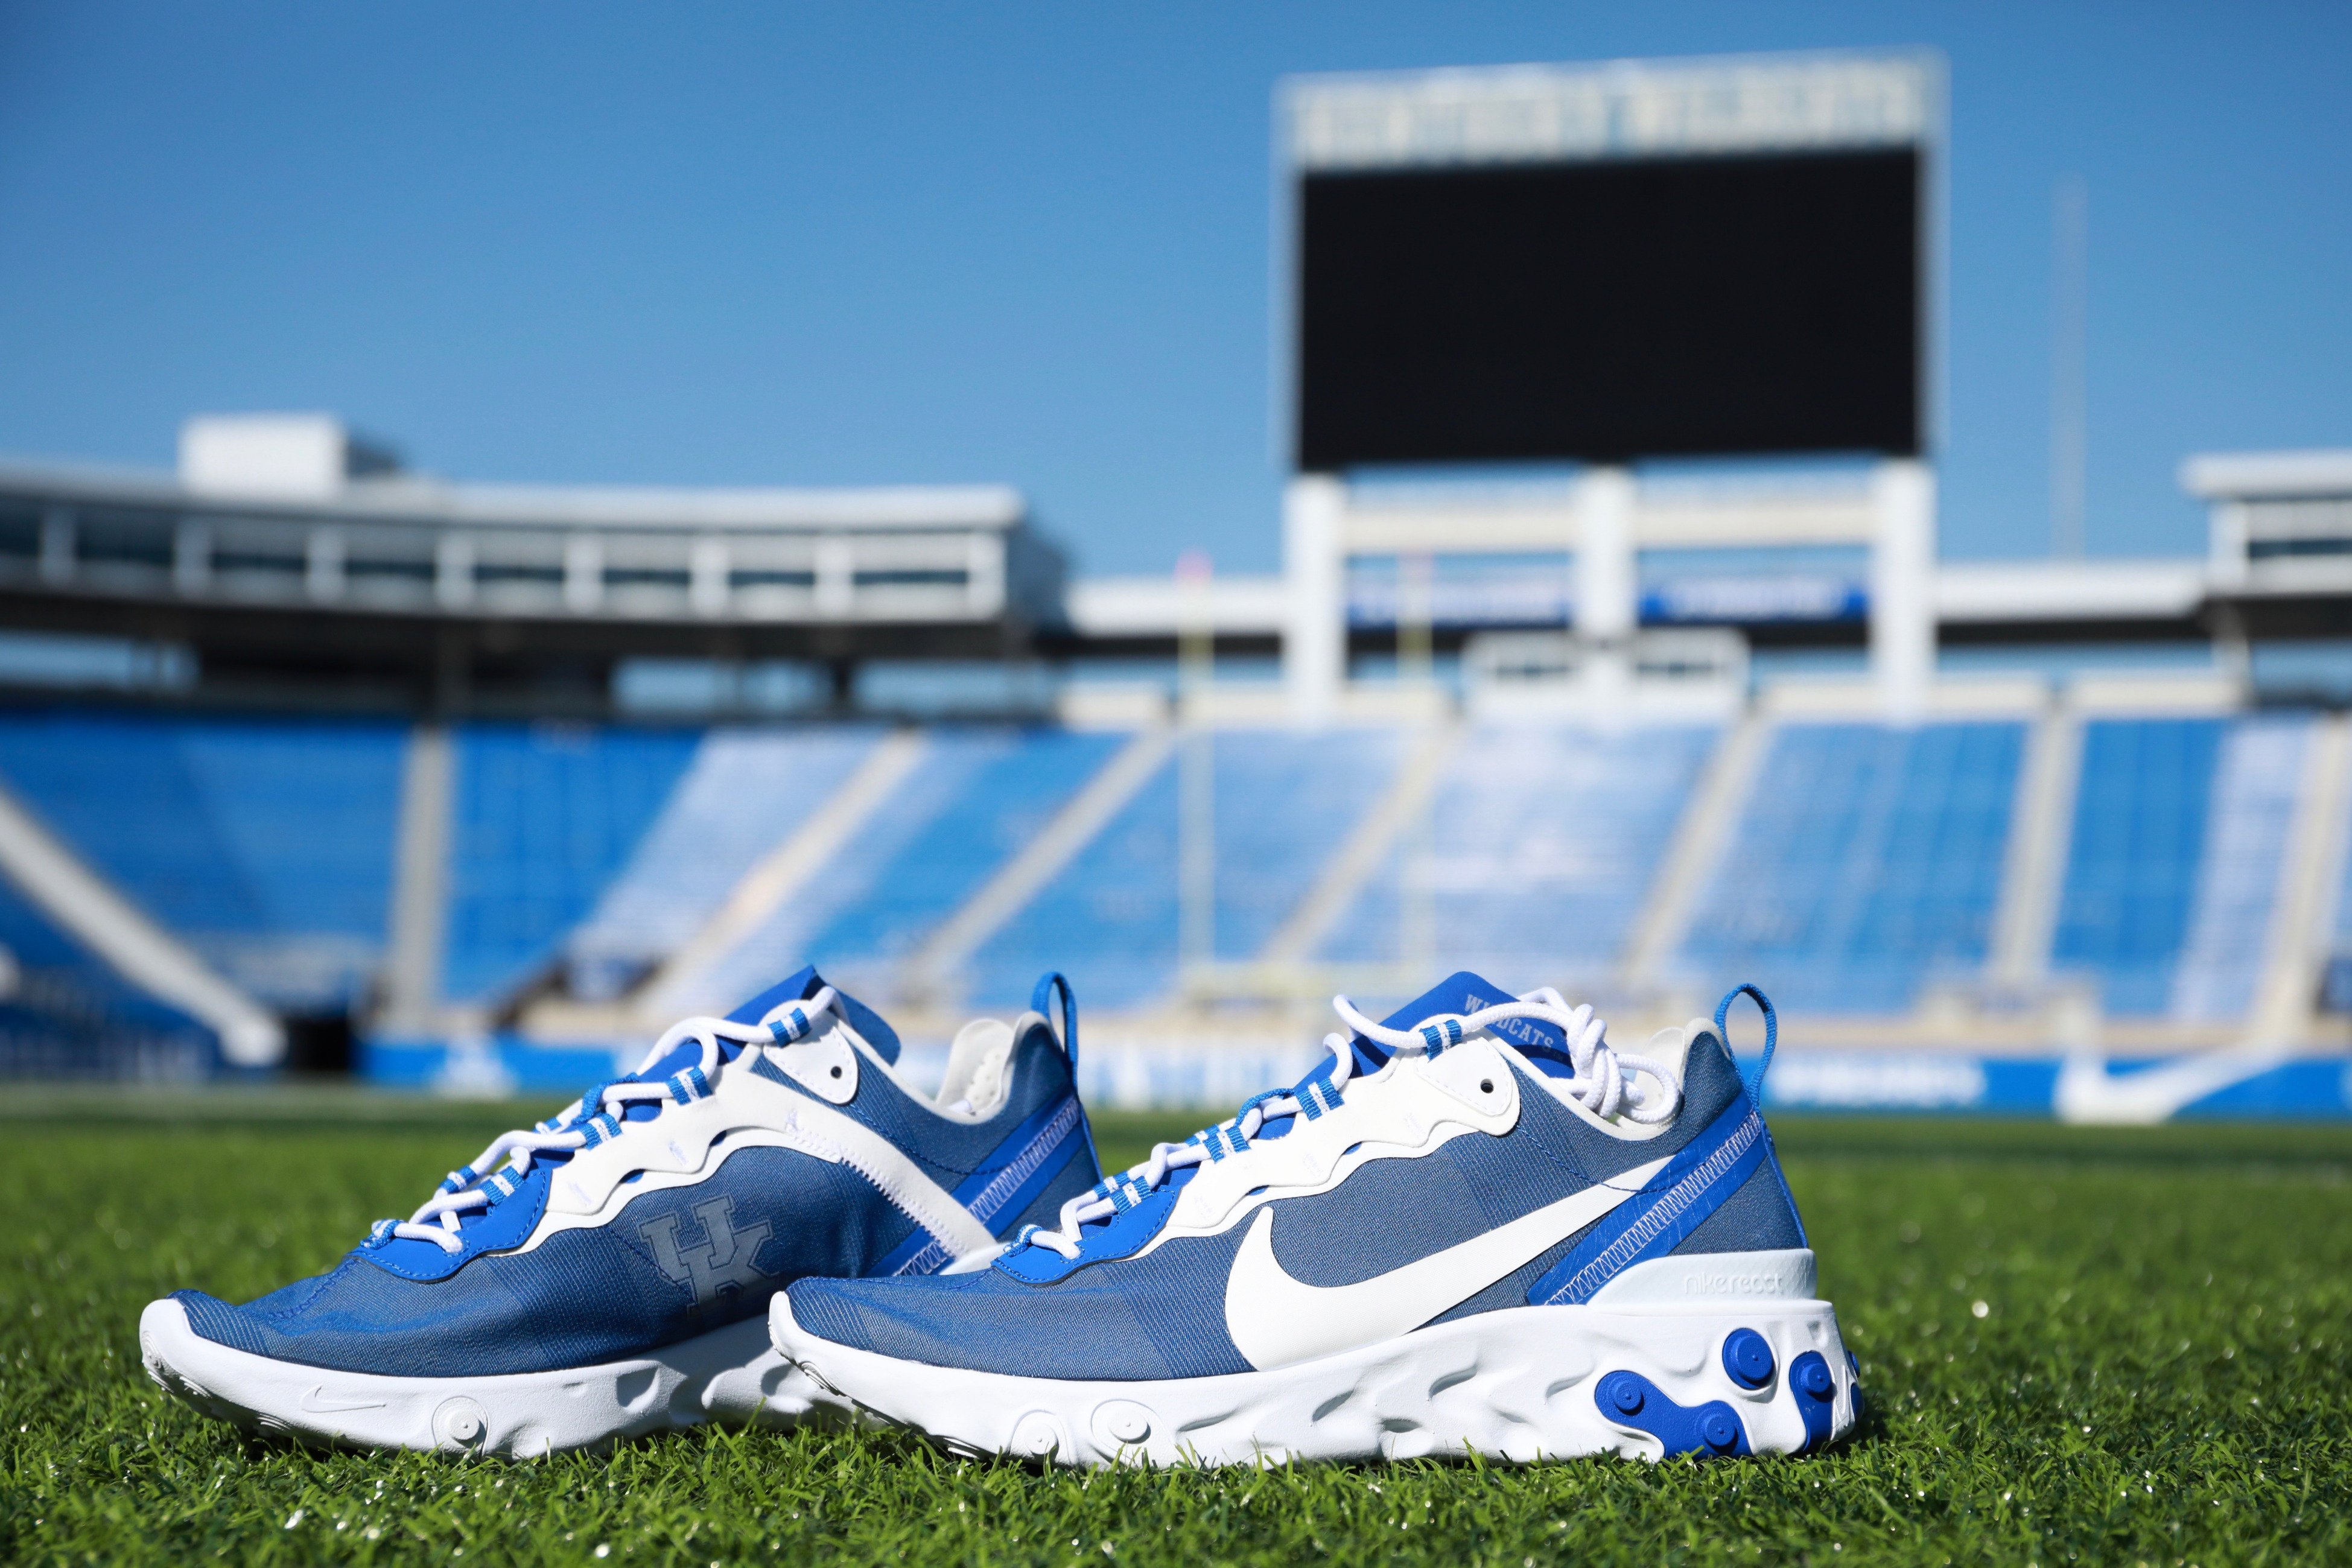 Kentucky Football on Twitter: "🔵⚪️ UK-branded Nike React Element ⚪️🔵 These #KentuckyKicks 🔥 are available in the team shop ➡️ https://t.co/LDUdvHUHT7 https://t.co/LUOU4g4lBZ" / Twitter